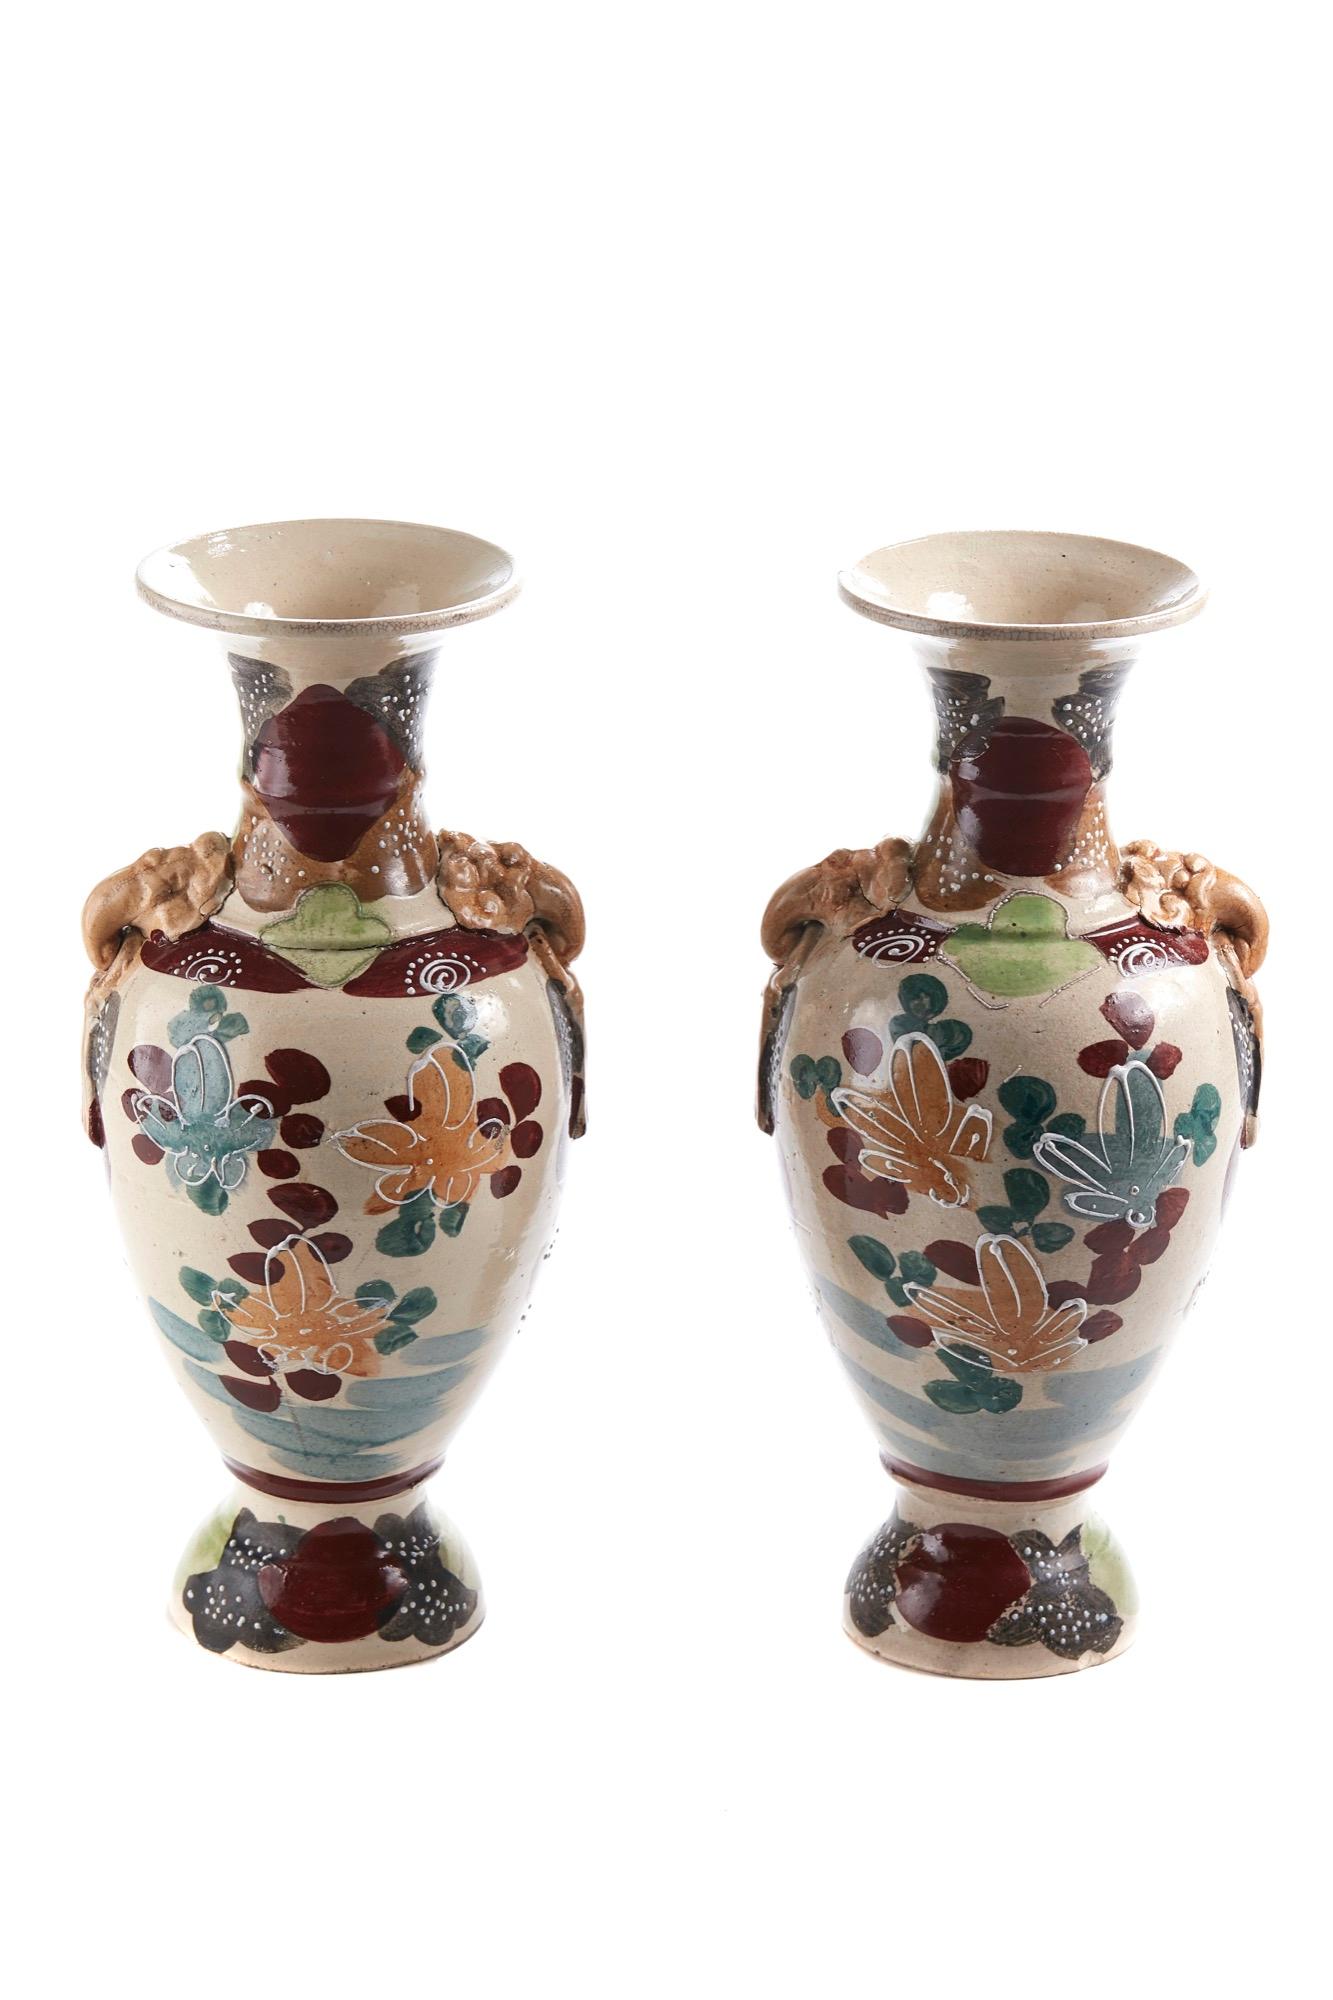 These are a pair of antique Satsuma vases that have a very colorful decoration. They are in perfect condition.